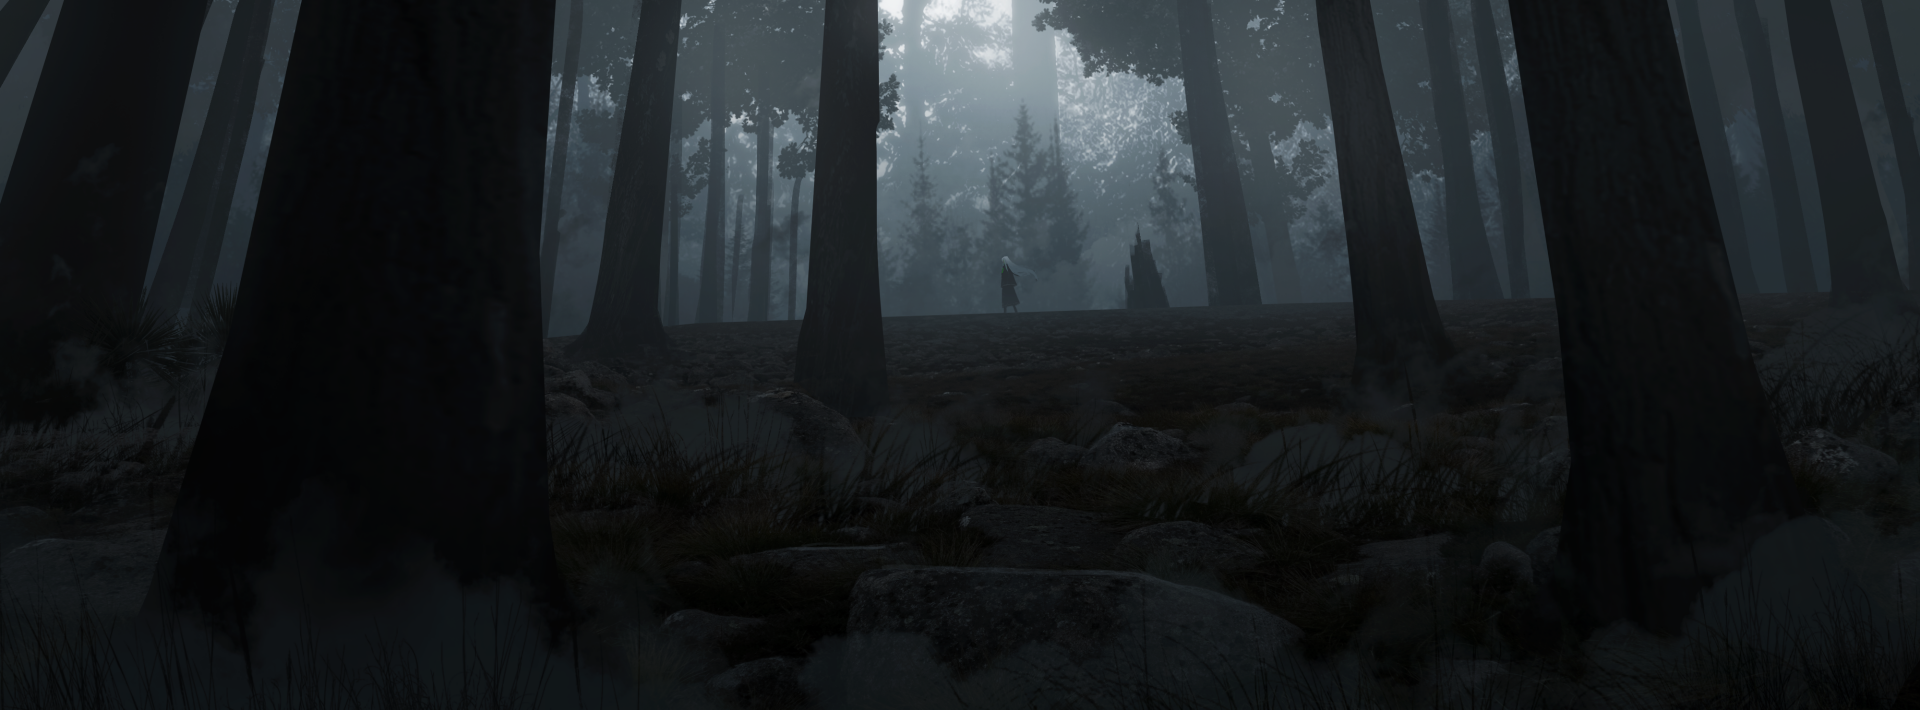 Mysterious Anime character with white hair standing in a dark forest - HD desktop wallpaper.